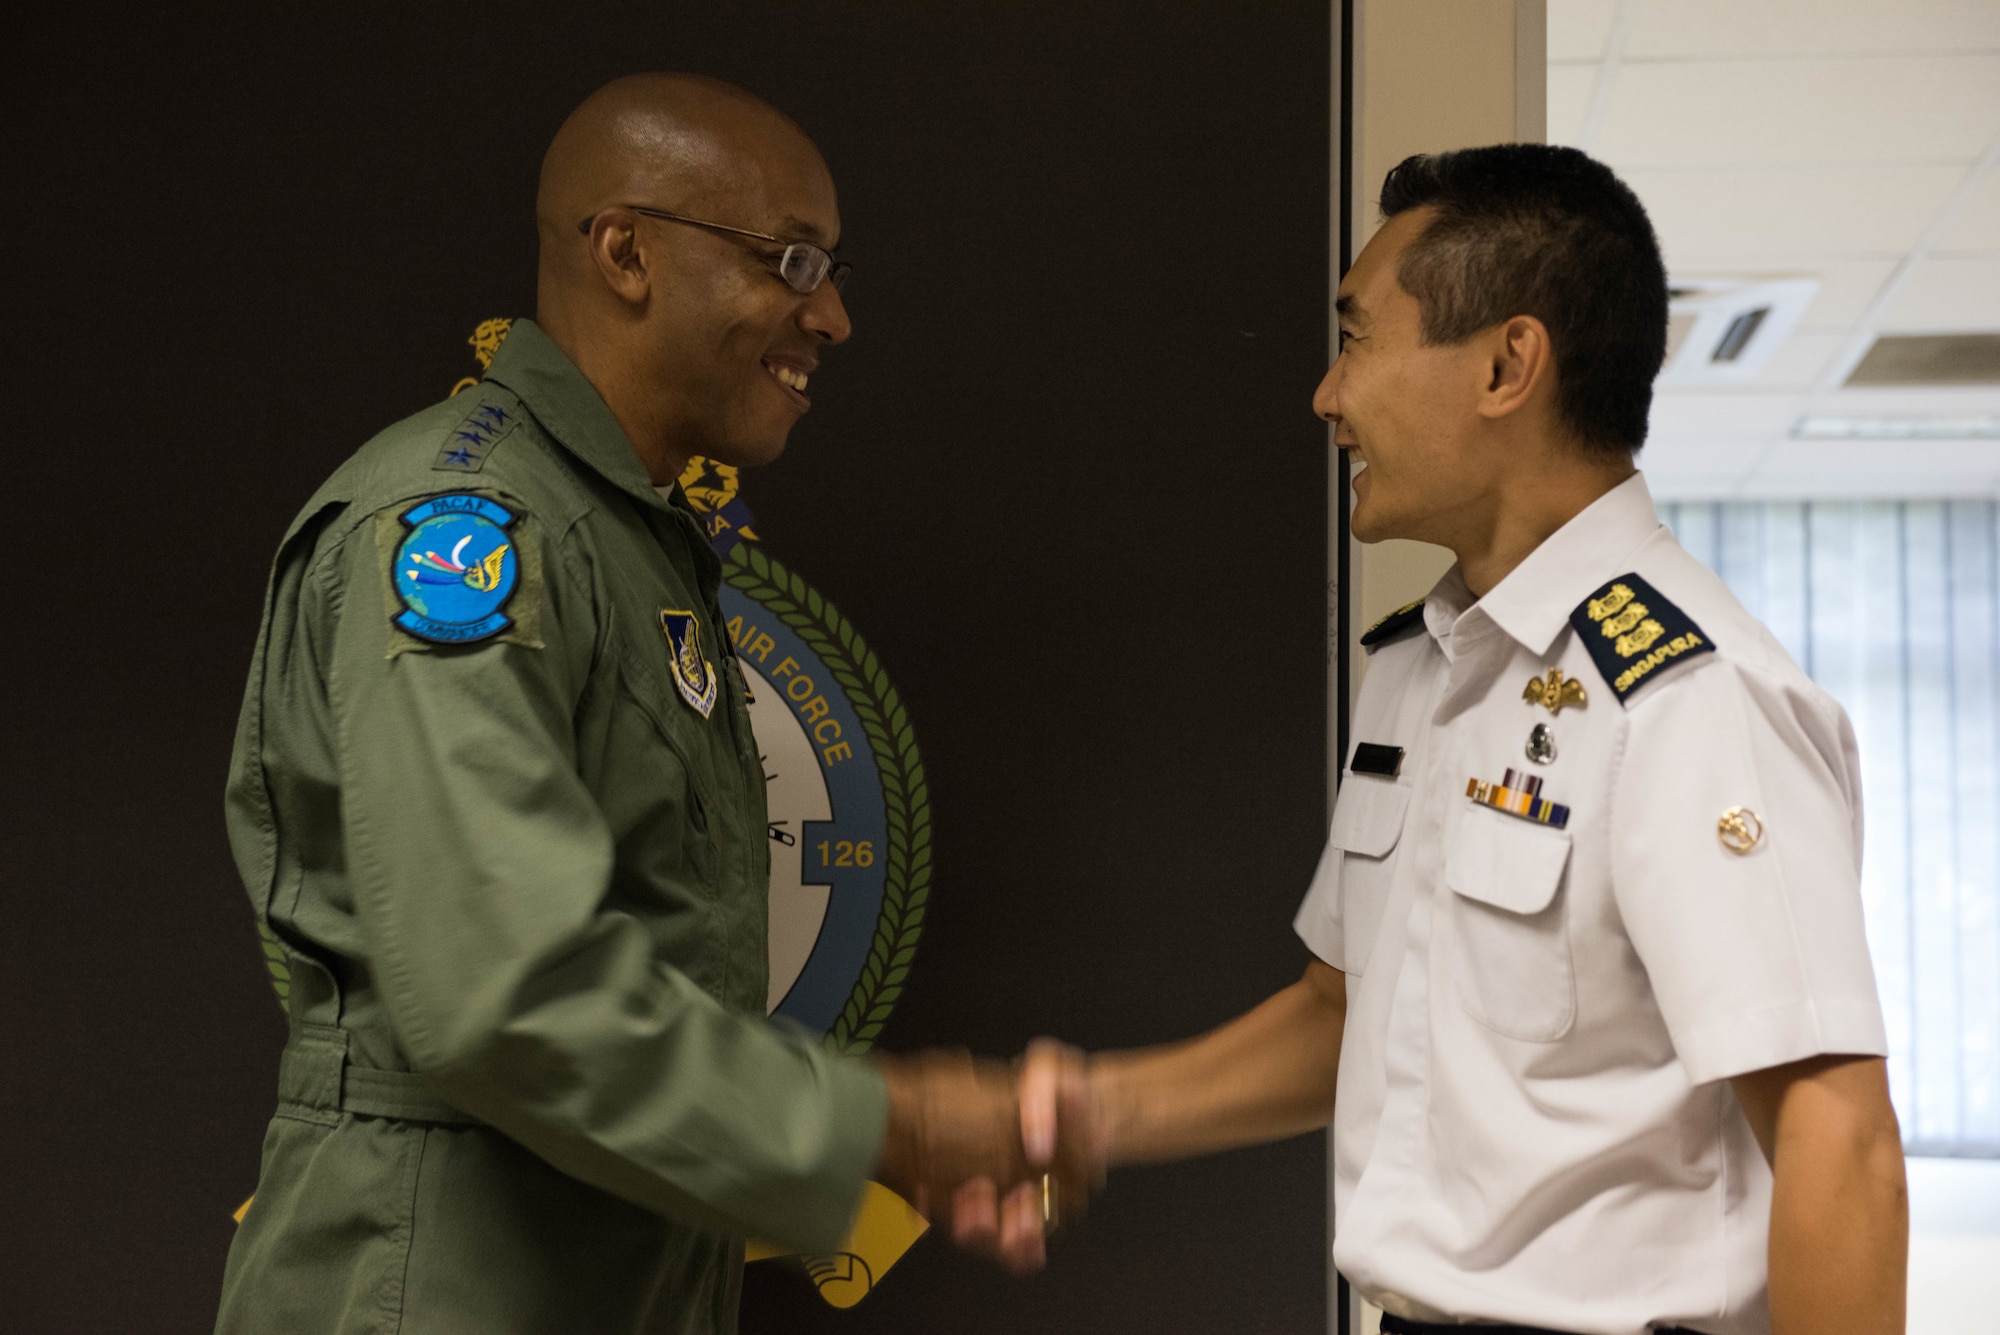 U.S. Air Force Gen. CQ Brown, Jr., Pacific Air Forces commander, shakes hands with Singapore Air Force Col. Sherman Ong, Command Helicopter Group, after a visit to Sembawang Air Base, Singapore, March 19, 2019.